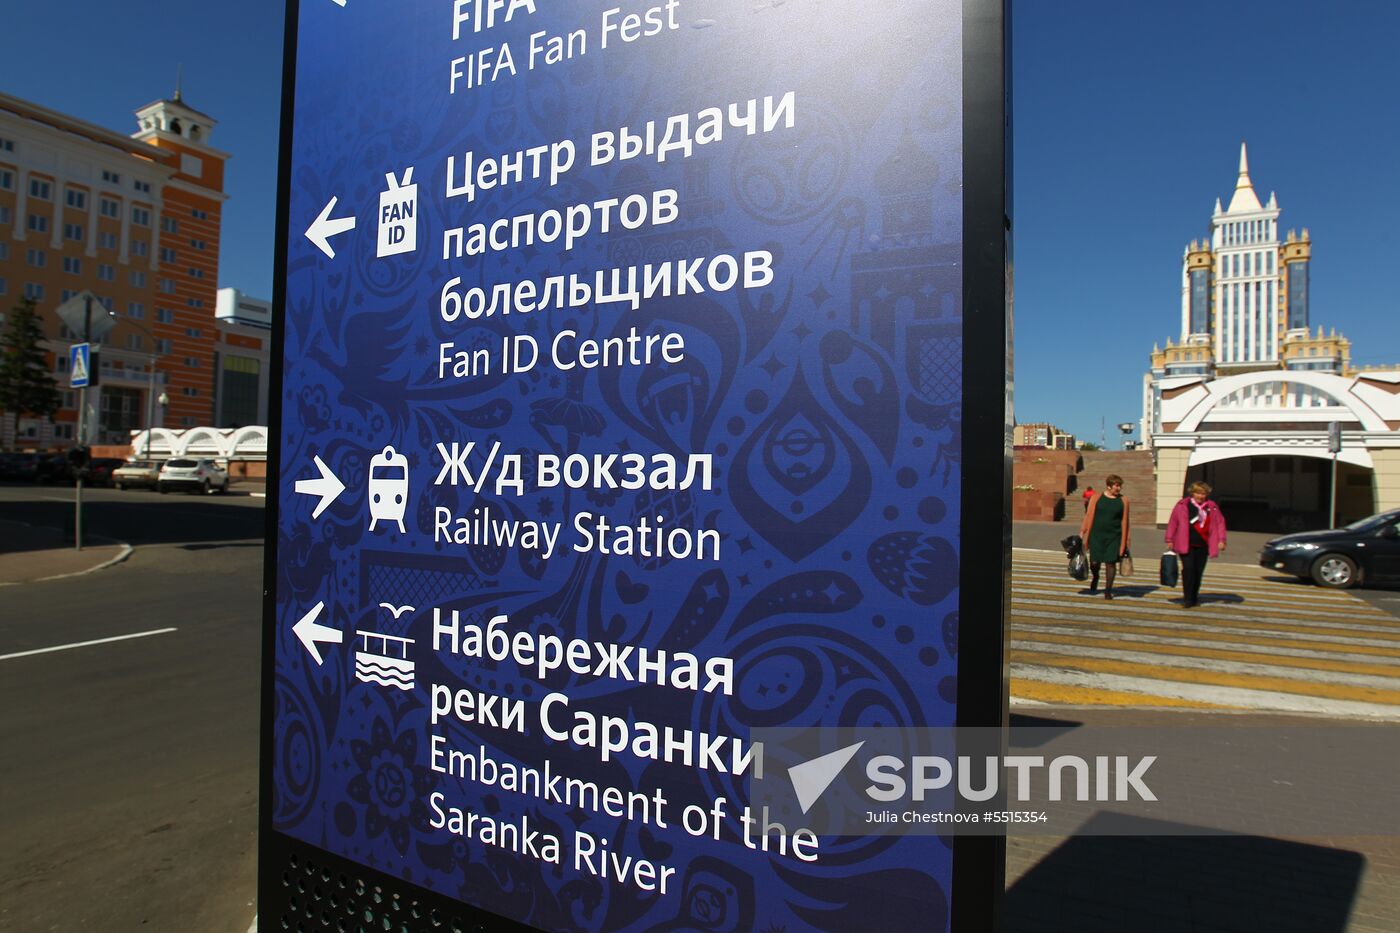 Preparations for 2018 World Cup in Saransk